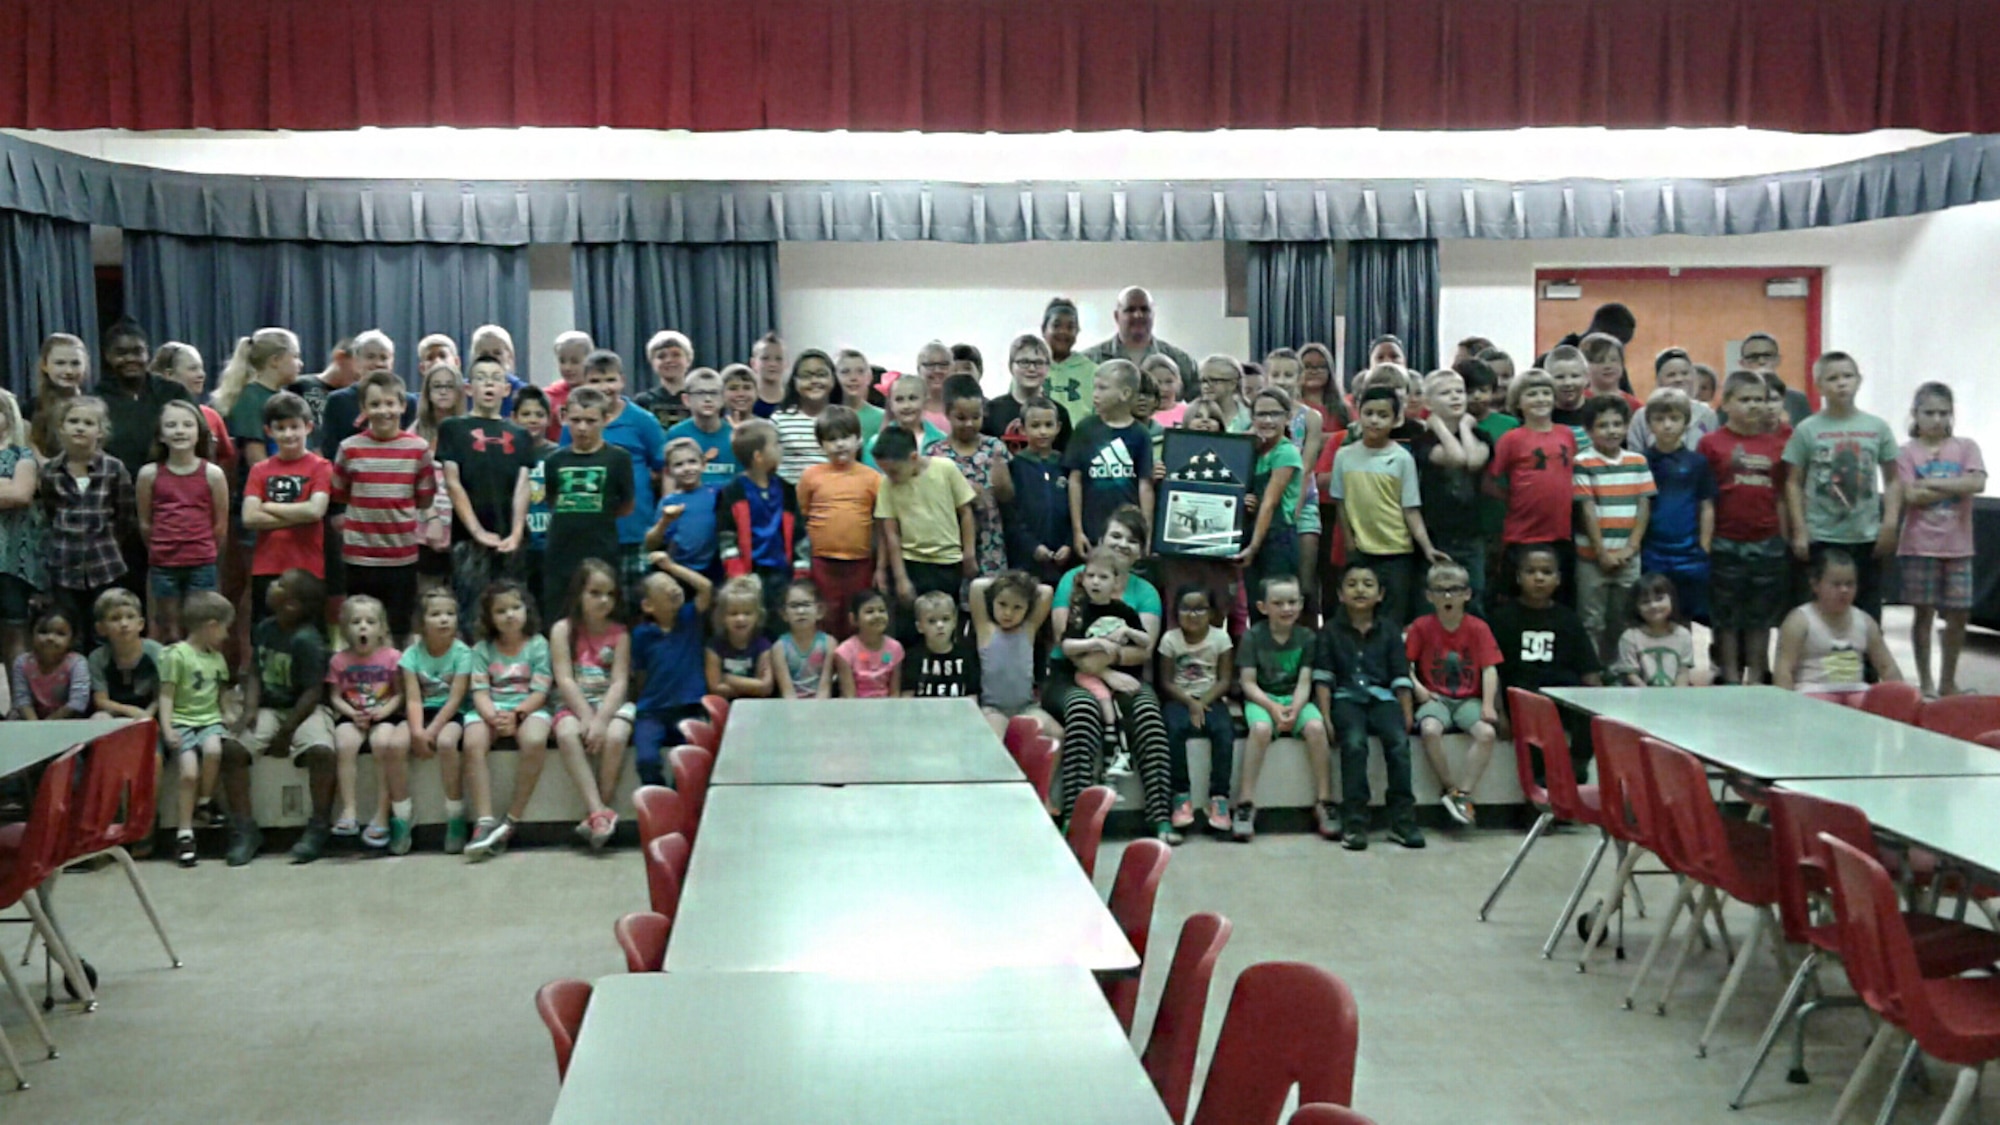 U.S. Air Force Master Sgt. Anthony Molina, 97th Maintenance Directorate inspection managements flight chief, and students from Duke Elementary School pose for a photo, May 17, 2017, at Duke Elementary School, Oklahoma. The students of Duke Elementary received a U.S. flag that had been flowing during combat operations overseas as thanks for writing deployed members during the holidays. (Courtesy Photo/Released).